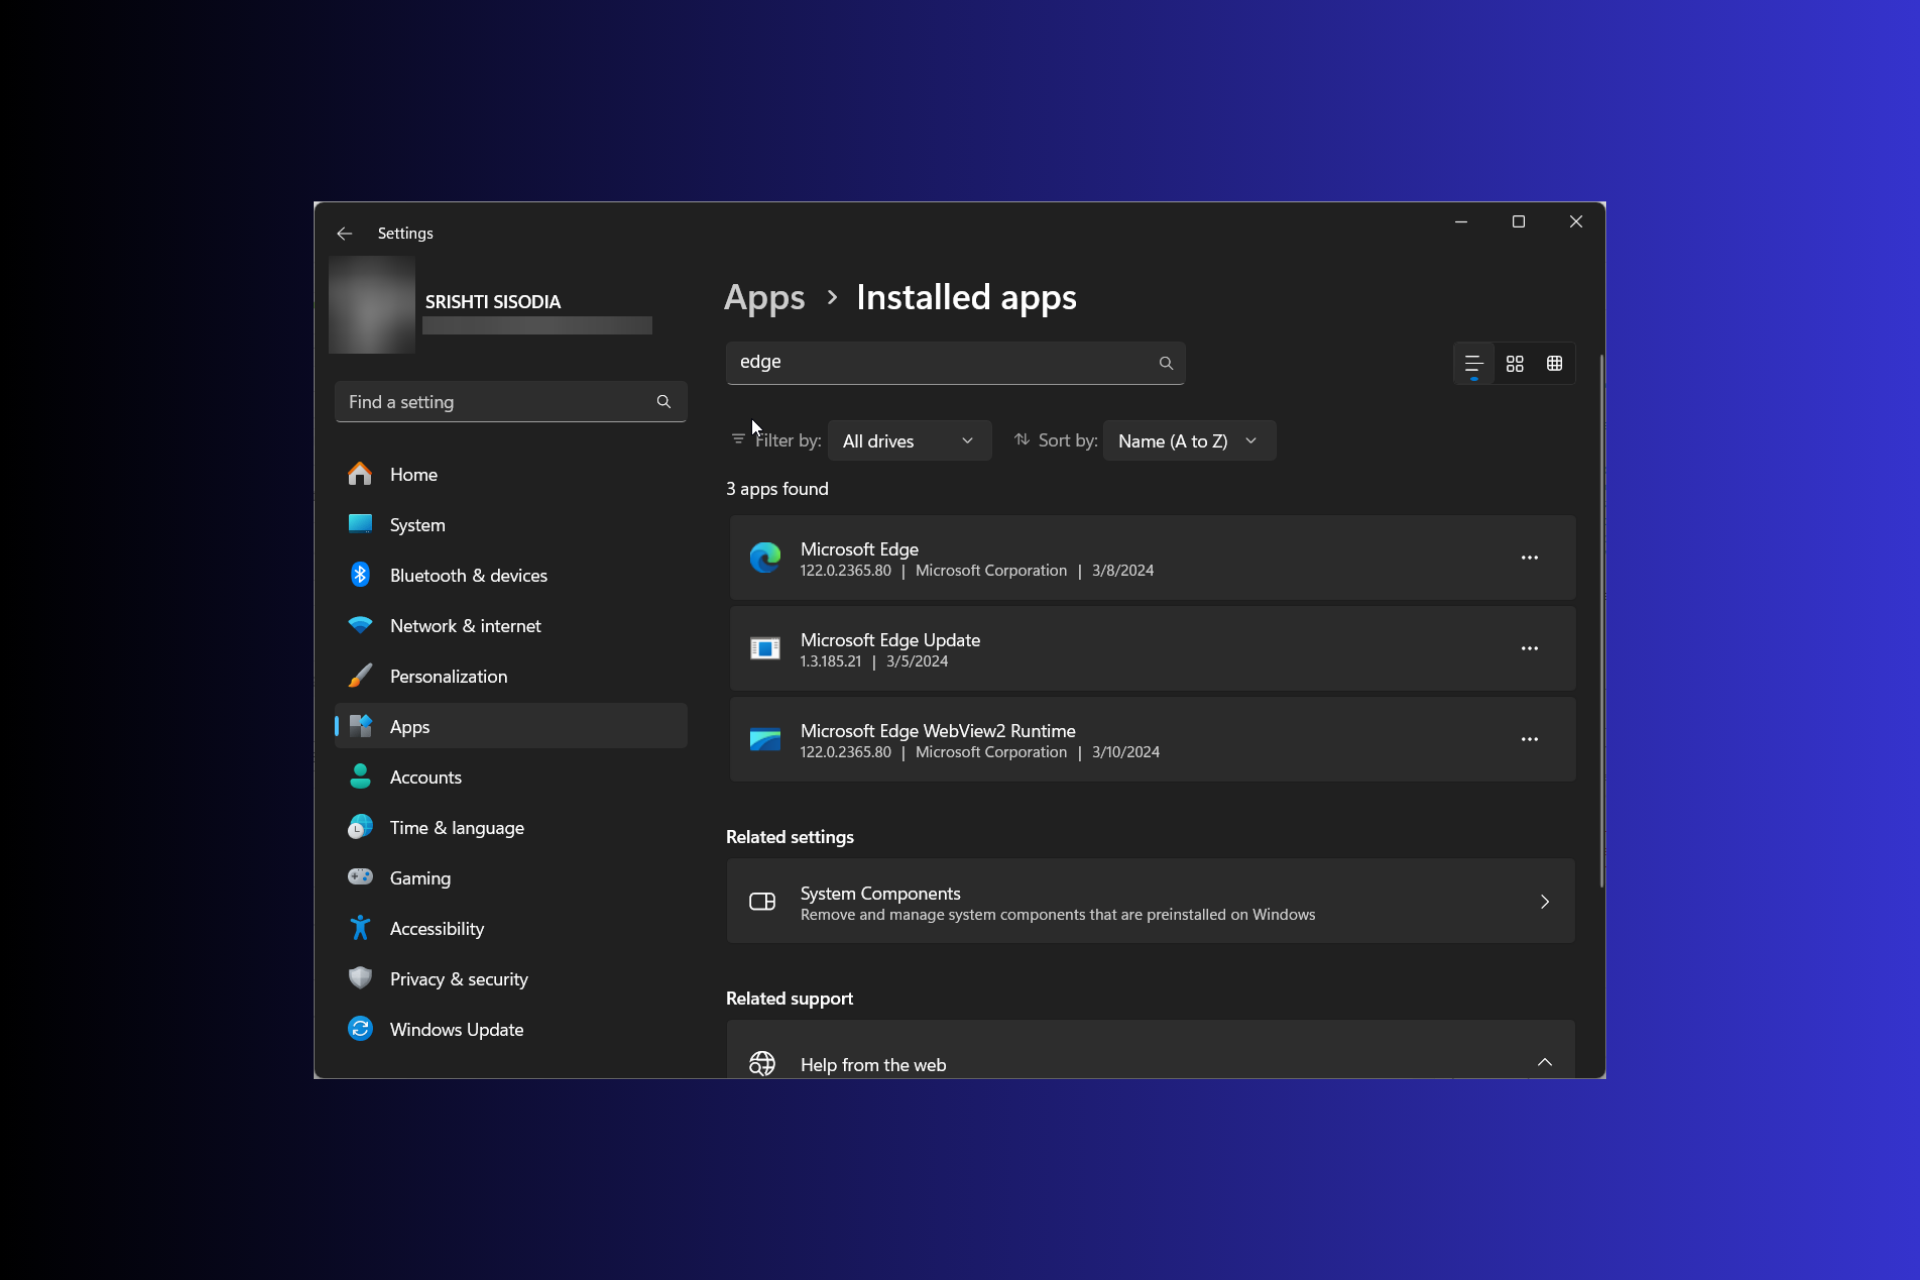 Now you can uninstall Microsoft Edge and Bing with ease